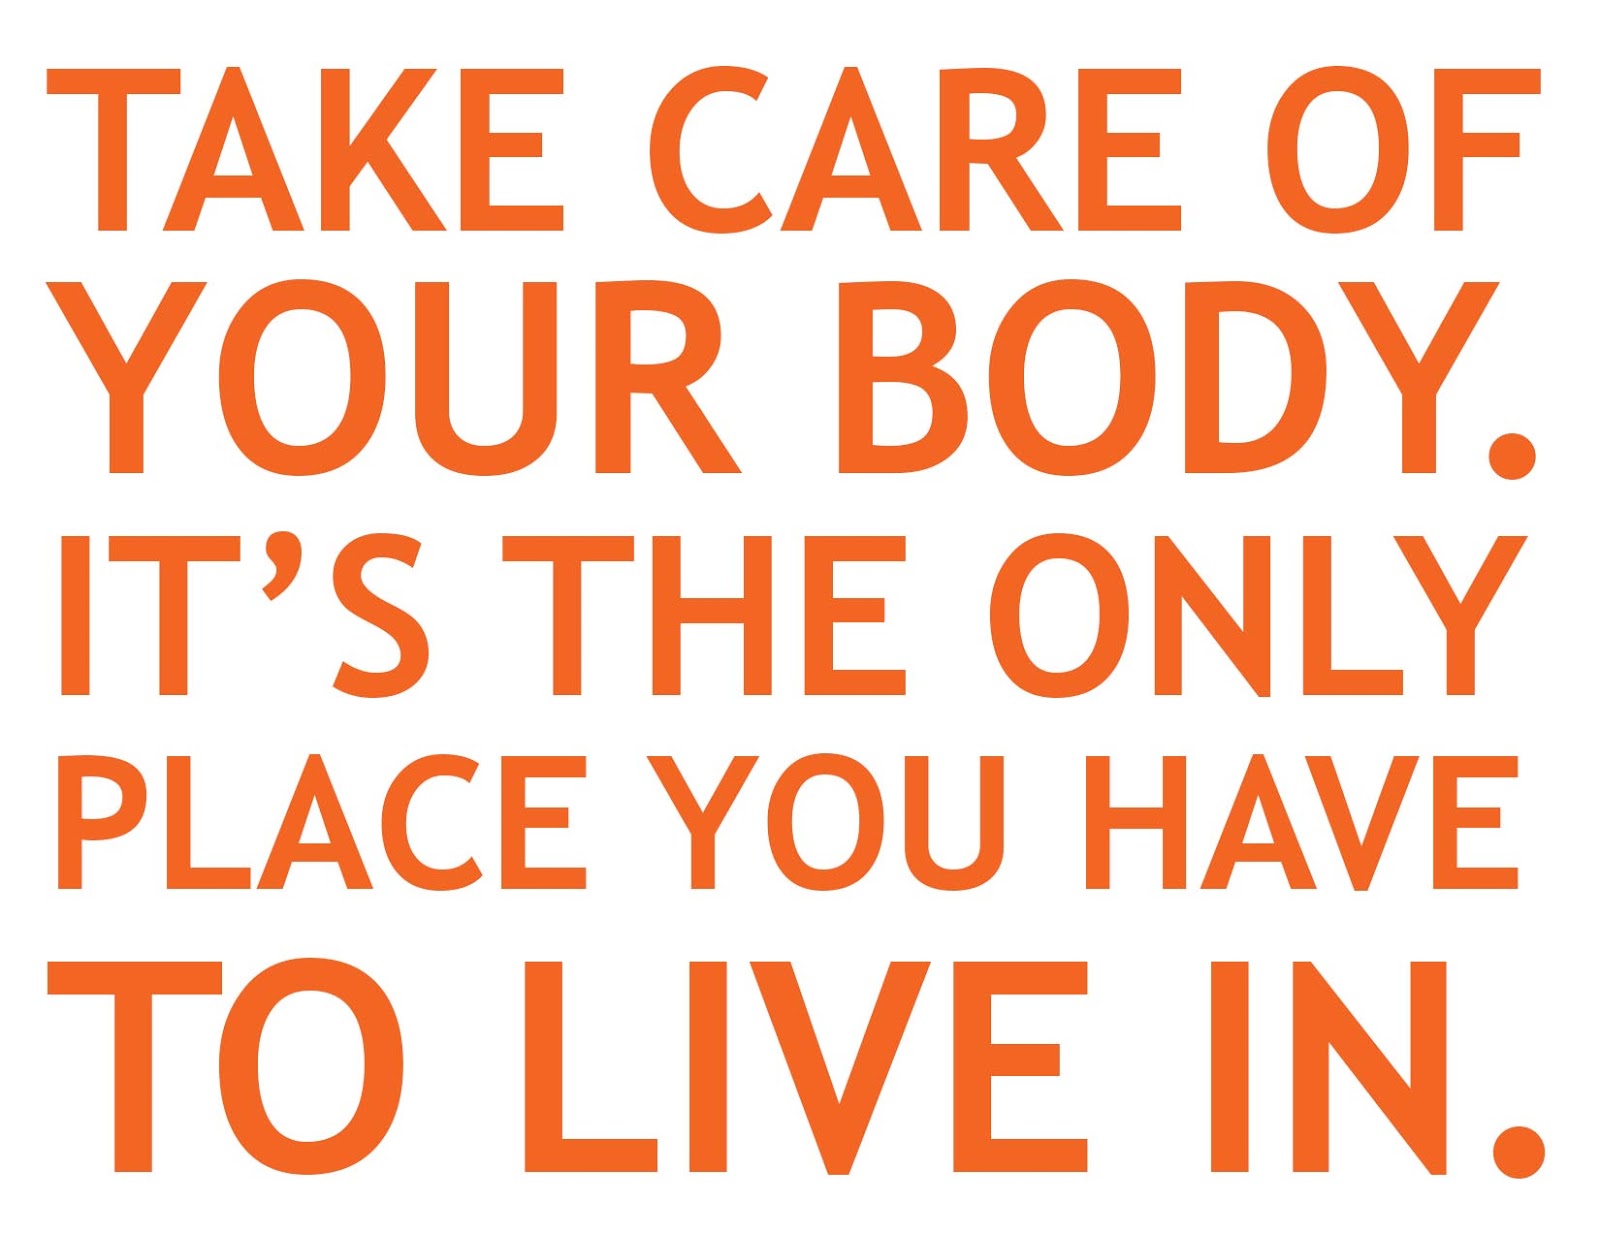 45+ Outstanding Collection of Health Quotes